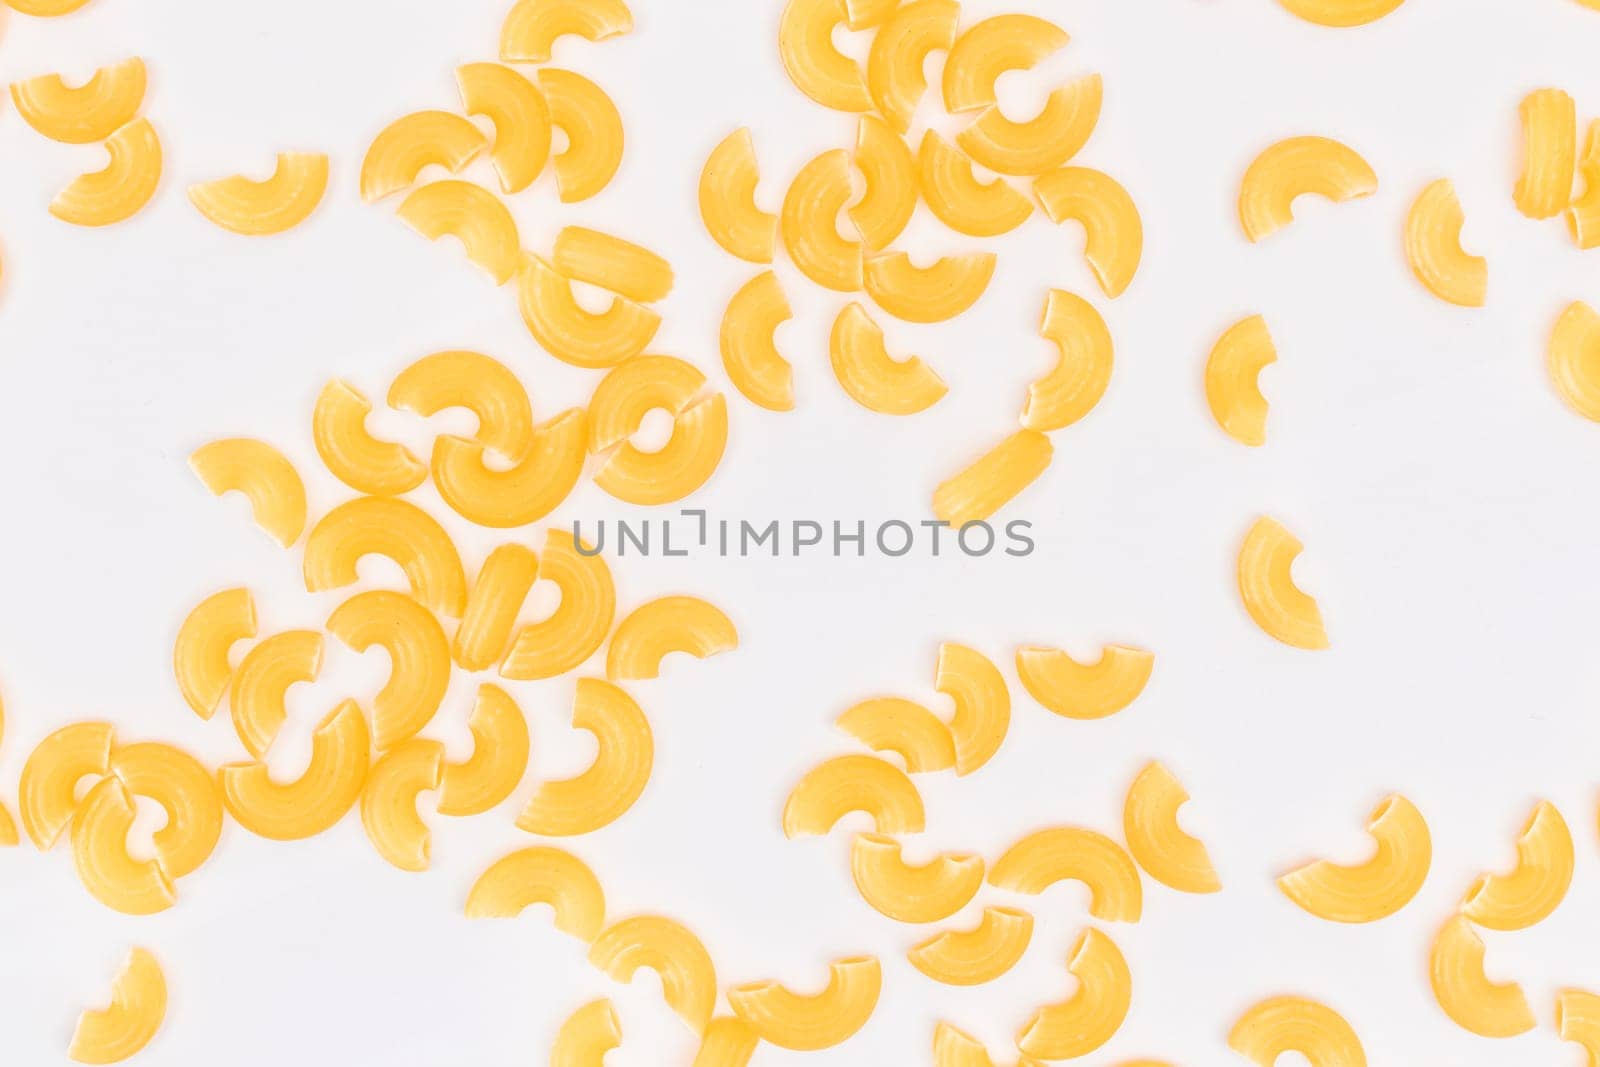 Scattered Uncooked Chifferi Rigati Pasta on White Background. Fat and Unhealthy Food. Classic Dry Macaroni Texture. Italian Culture and Cuisine. Raw Pasta